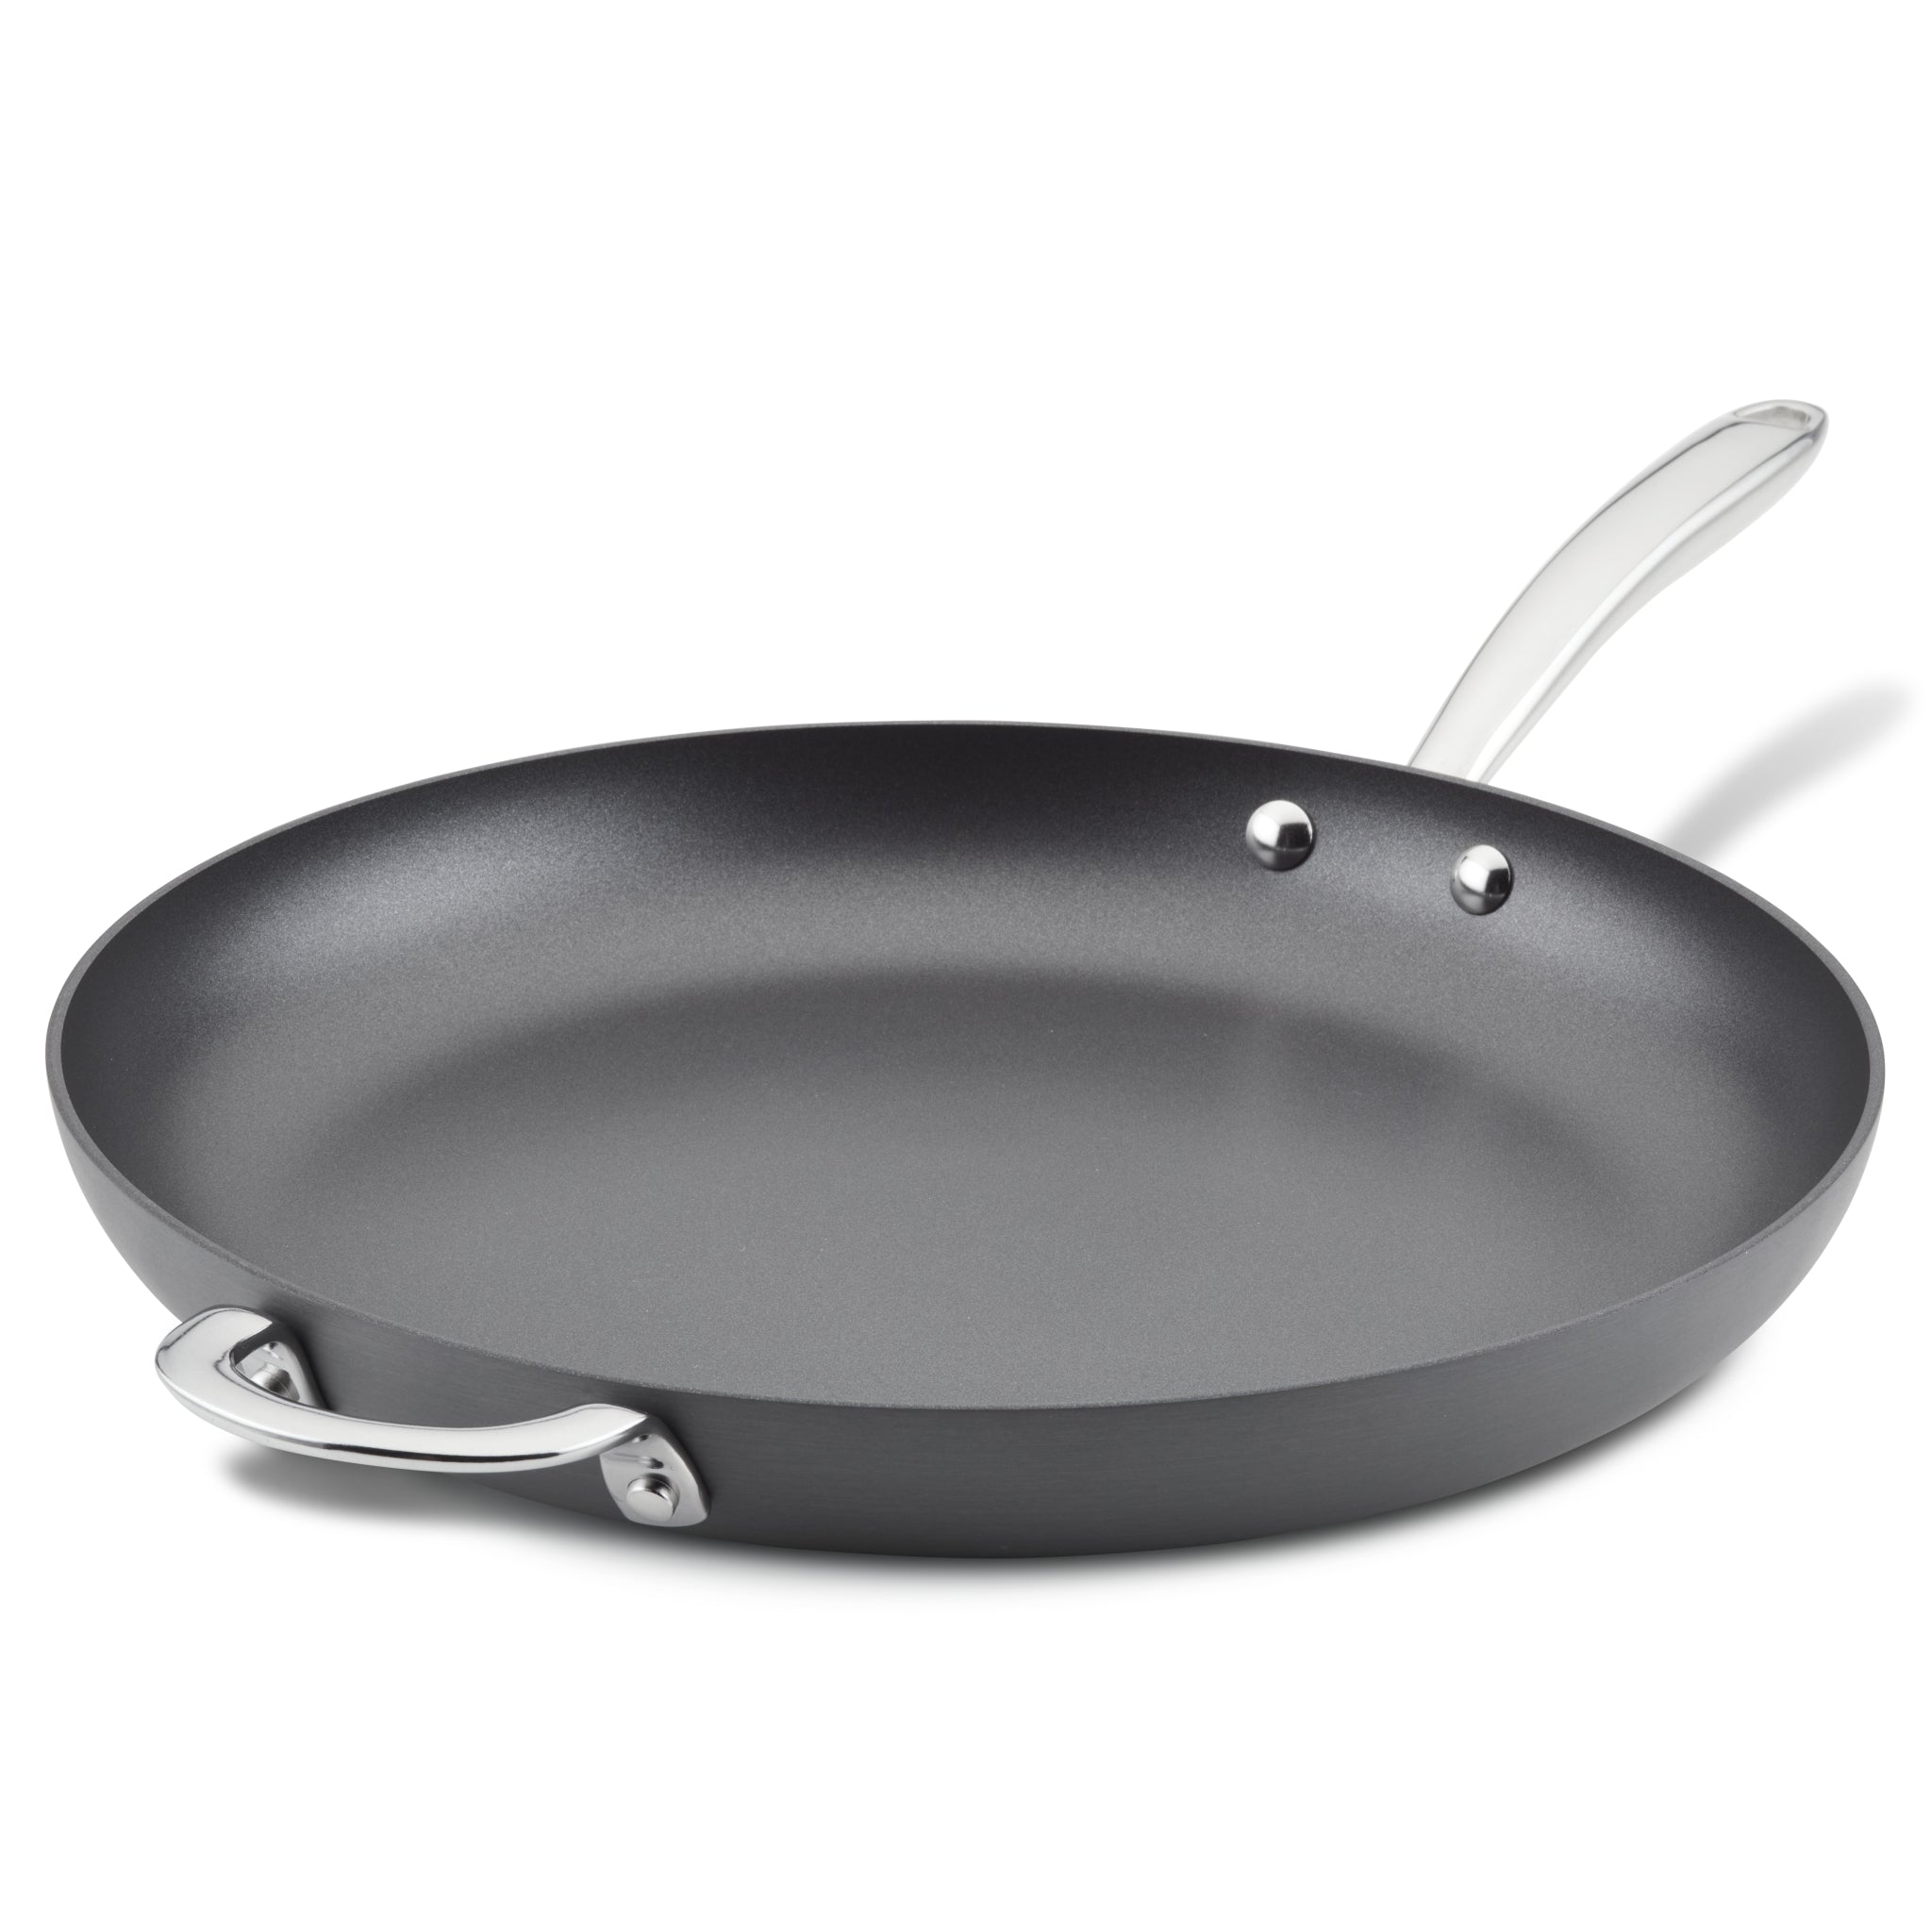 stainless-steel & hard-anodized nonstick cookware – Rachael Ray